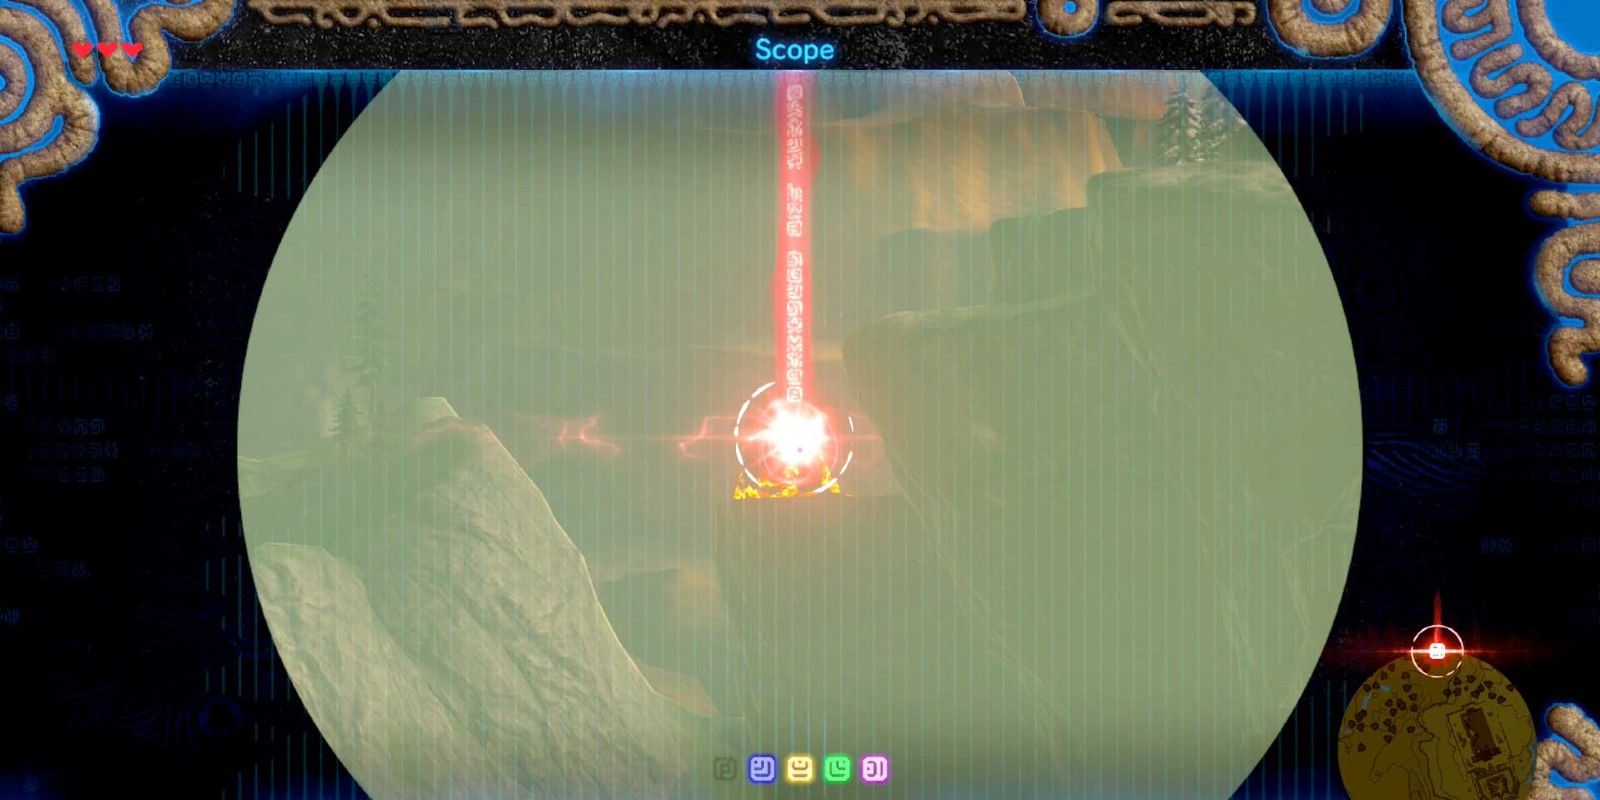 A shrine being marked on the map via the Sheikah Slate in The Legend of Zelda: Breath of the Wild.